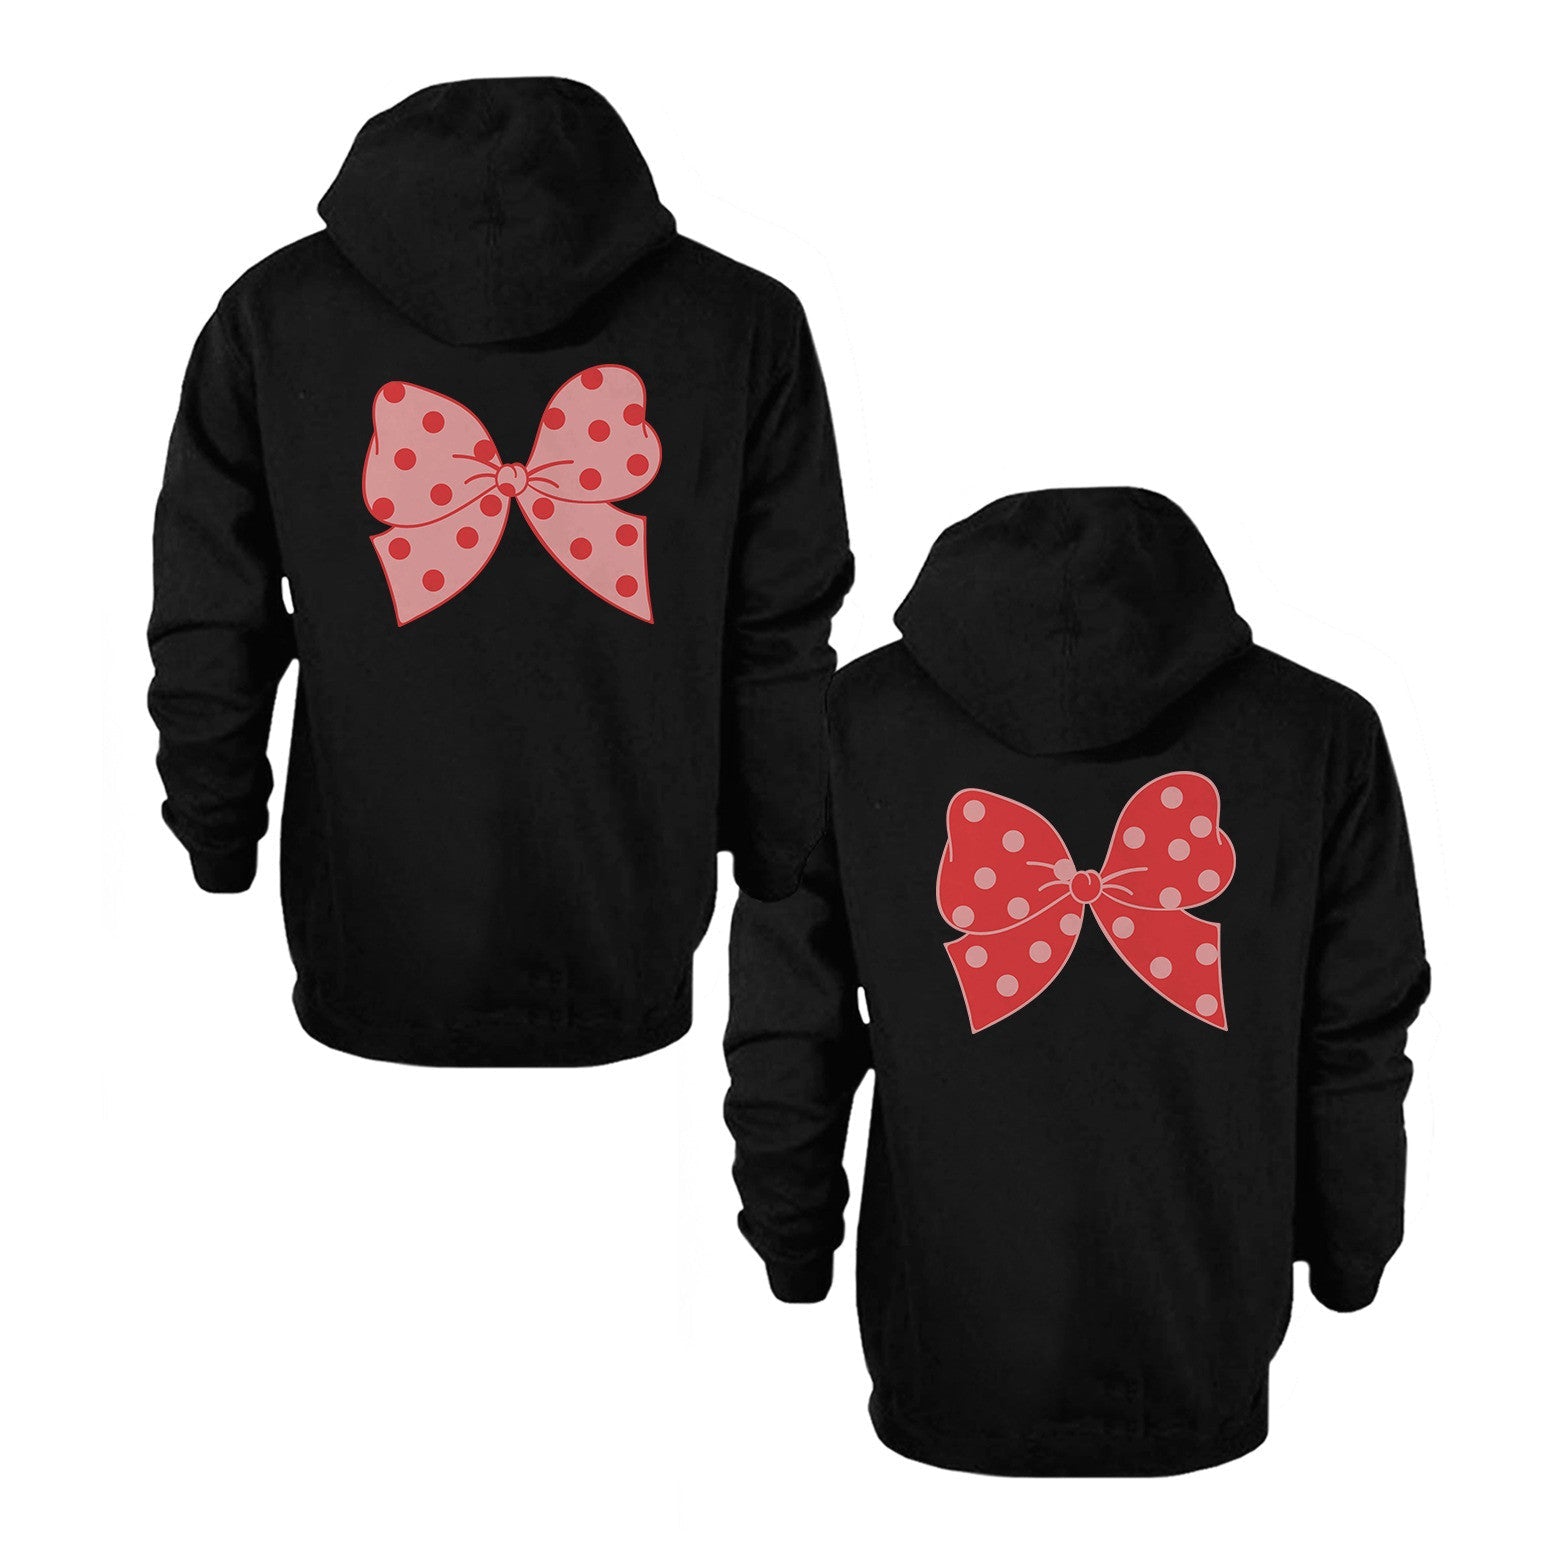 Funny Crazy And Crazier Bff Matching Best Friend Hoodies Front Back Design - 365 In Love